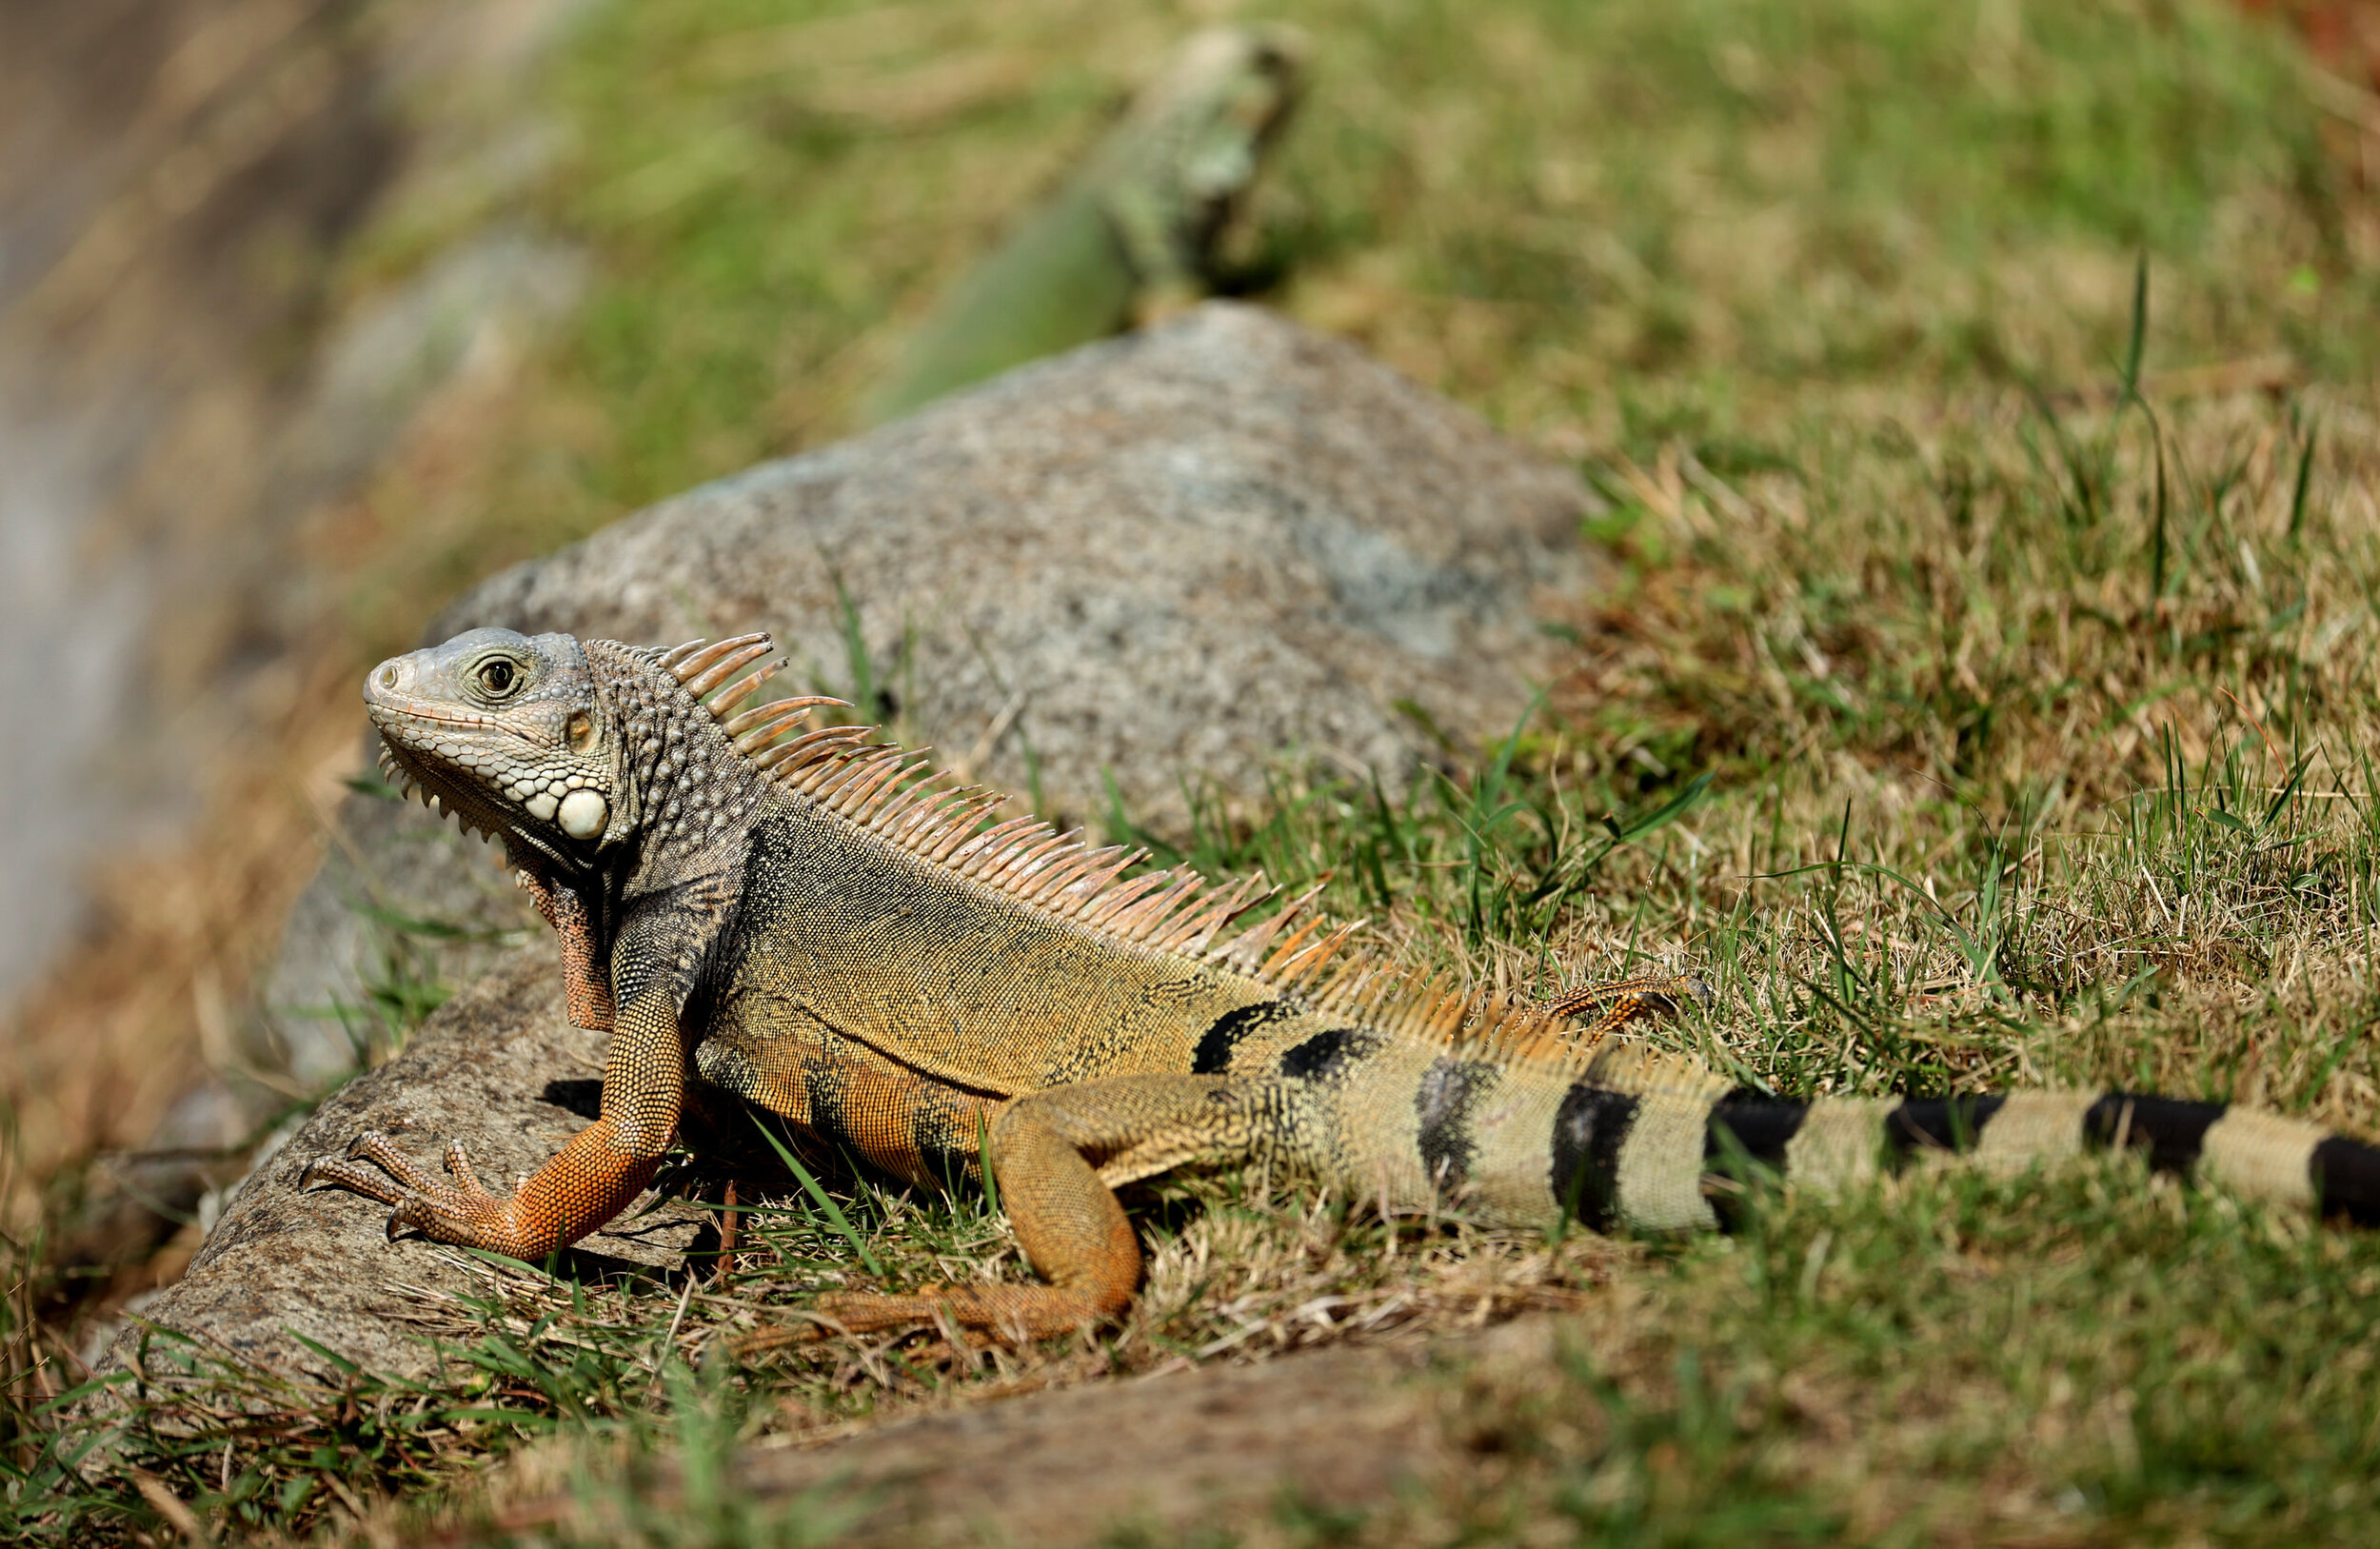  RIO GRANDE, PUERTO RICO - FEBRUARY 25: An Iguana suns itself on the course during the first round of the Puerto Rico Open at Grand Reserve Country Club on February 25, 2021 in Rio Grande, Puerto Rico.  (Photo by Andy Lyons/Getty Images) 